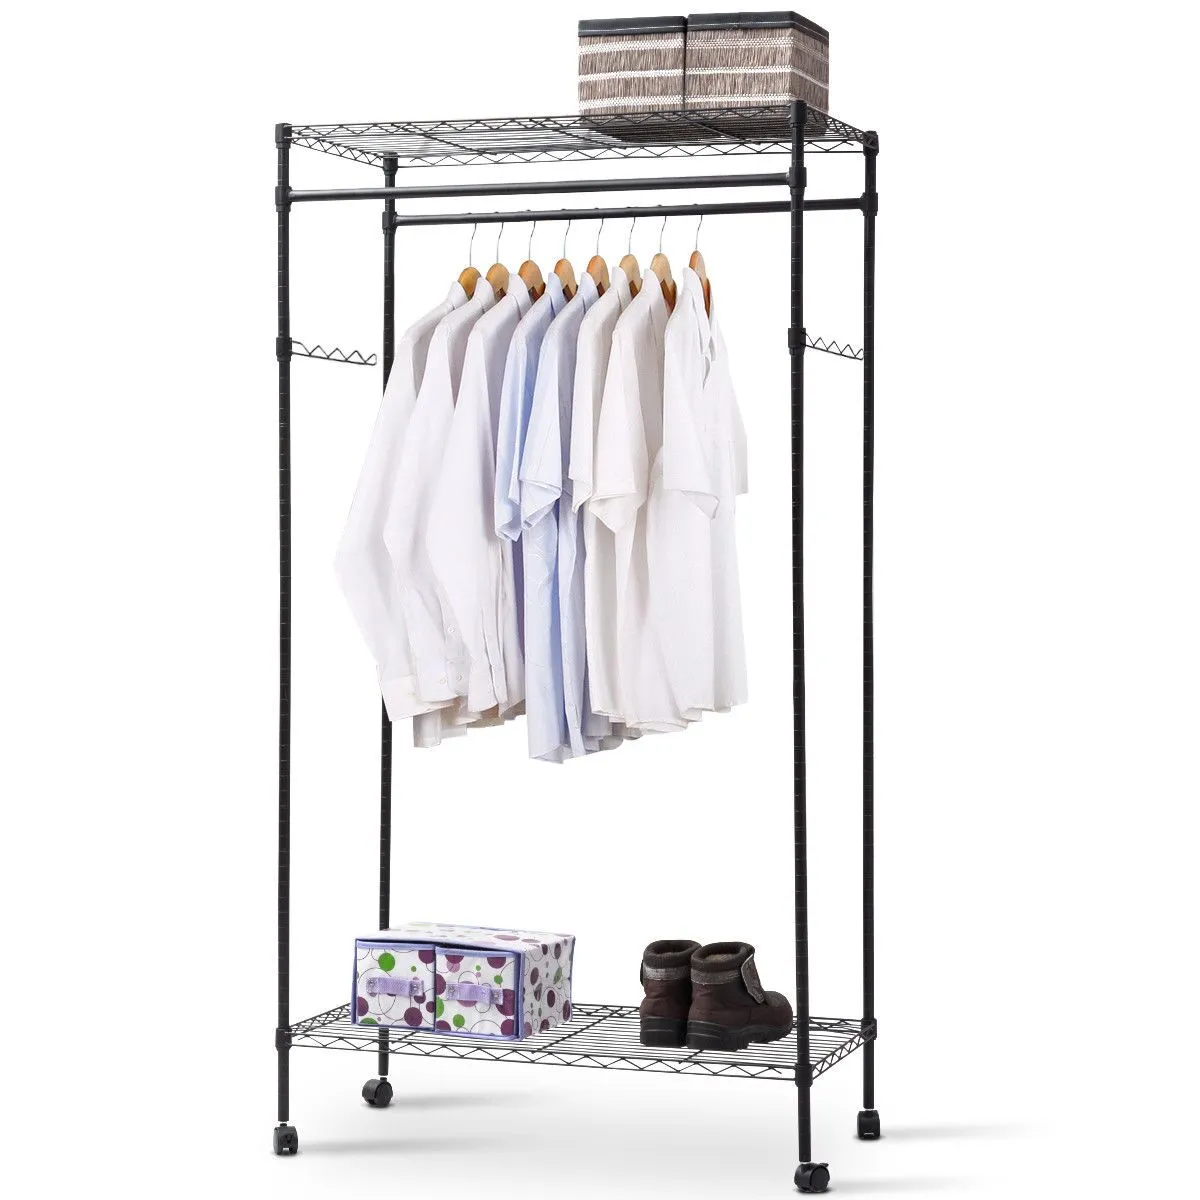 Cost-effective 2 Tier Garment Rack Recommended